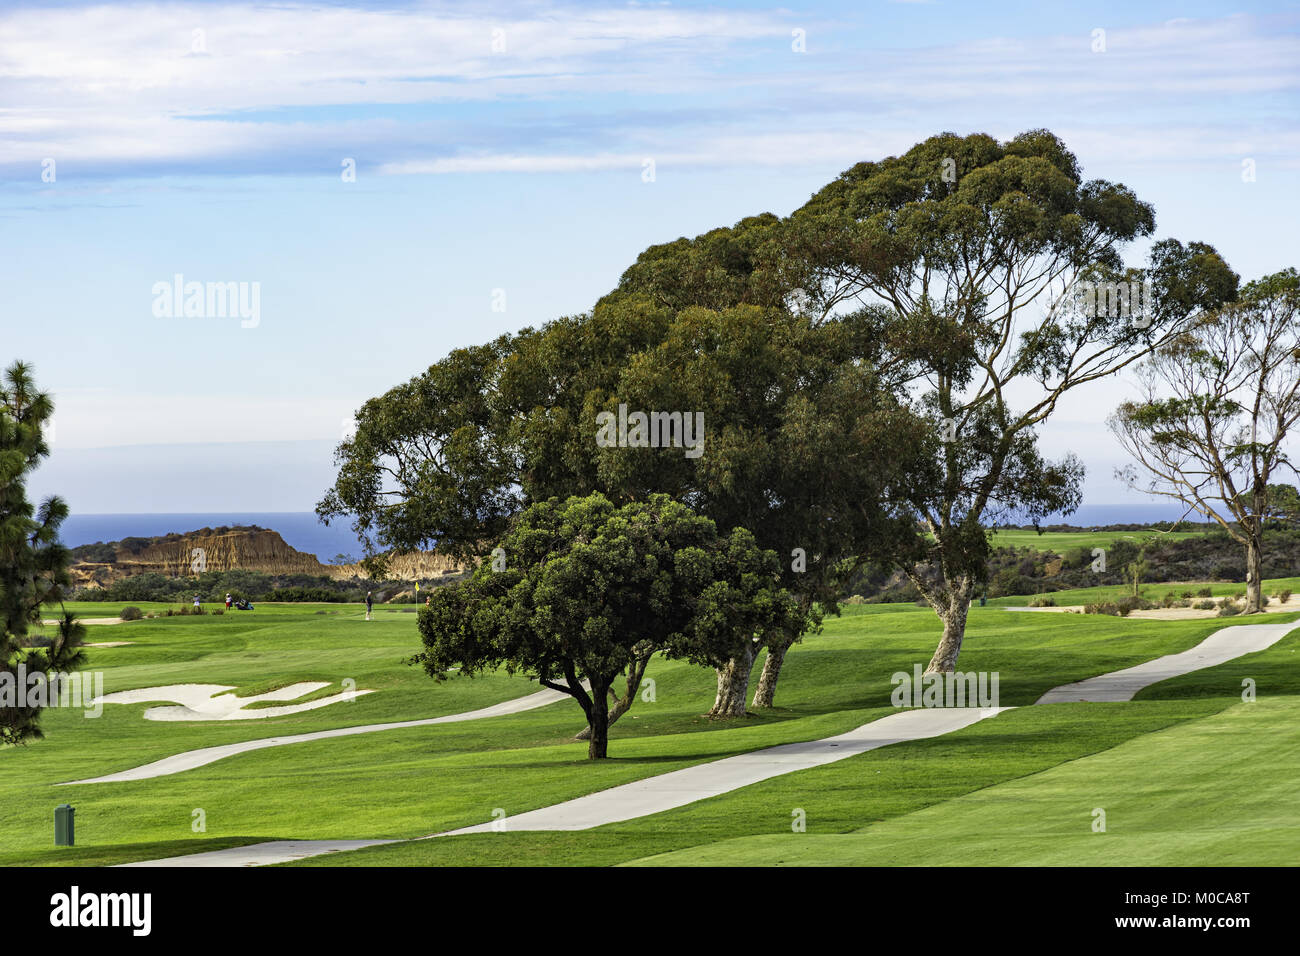 Golf Course at Torrey Pines with Pacific Ocean in the background La Jolla California USA near San Diego Stock Photo